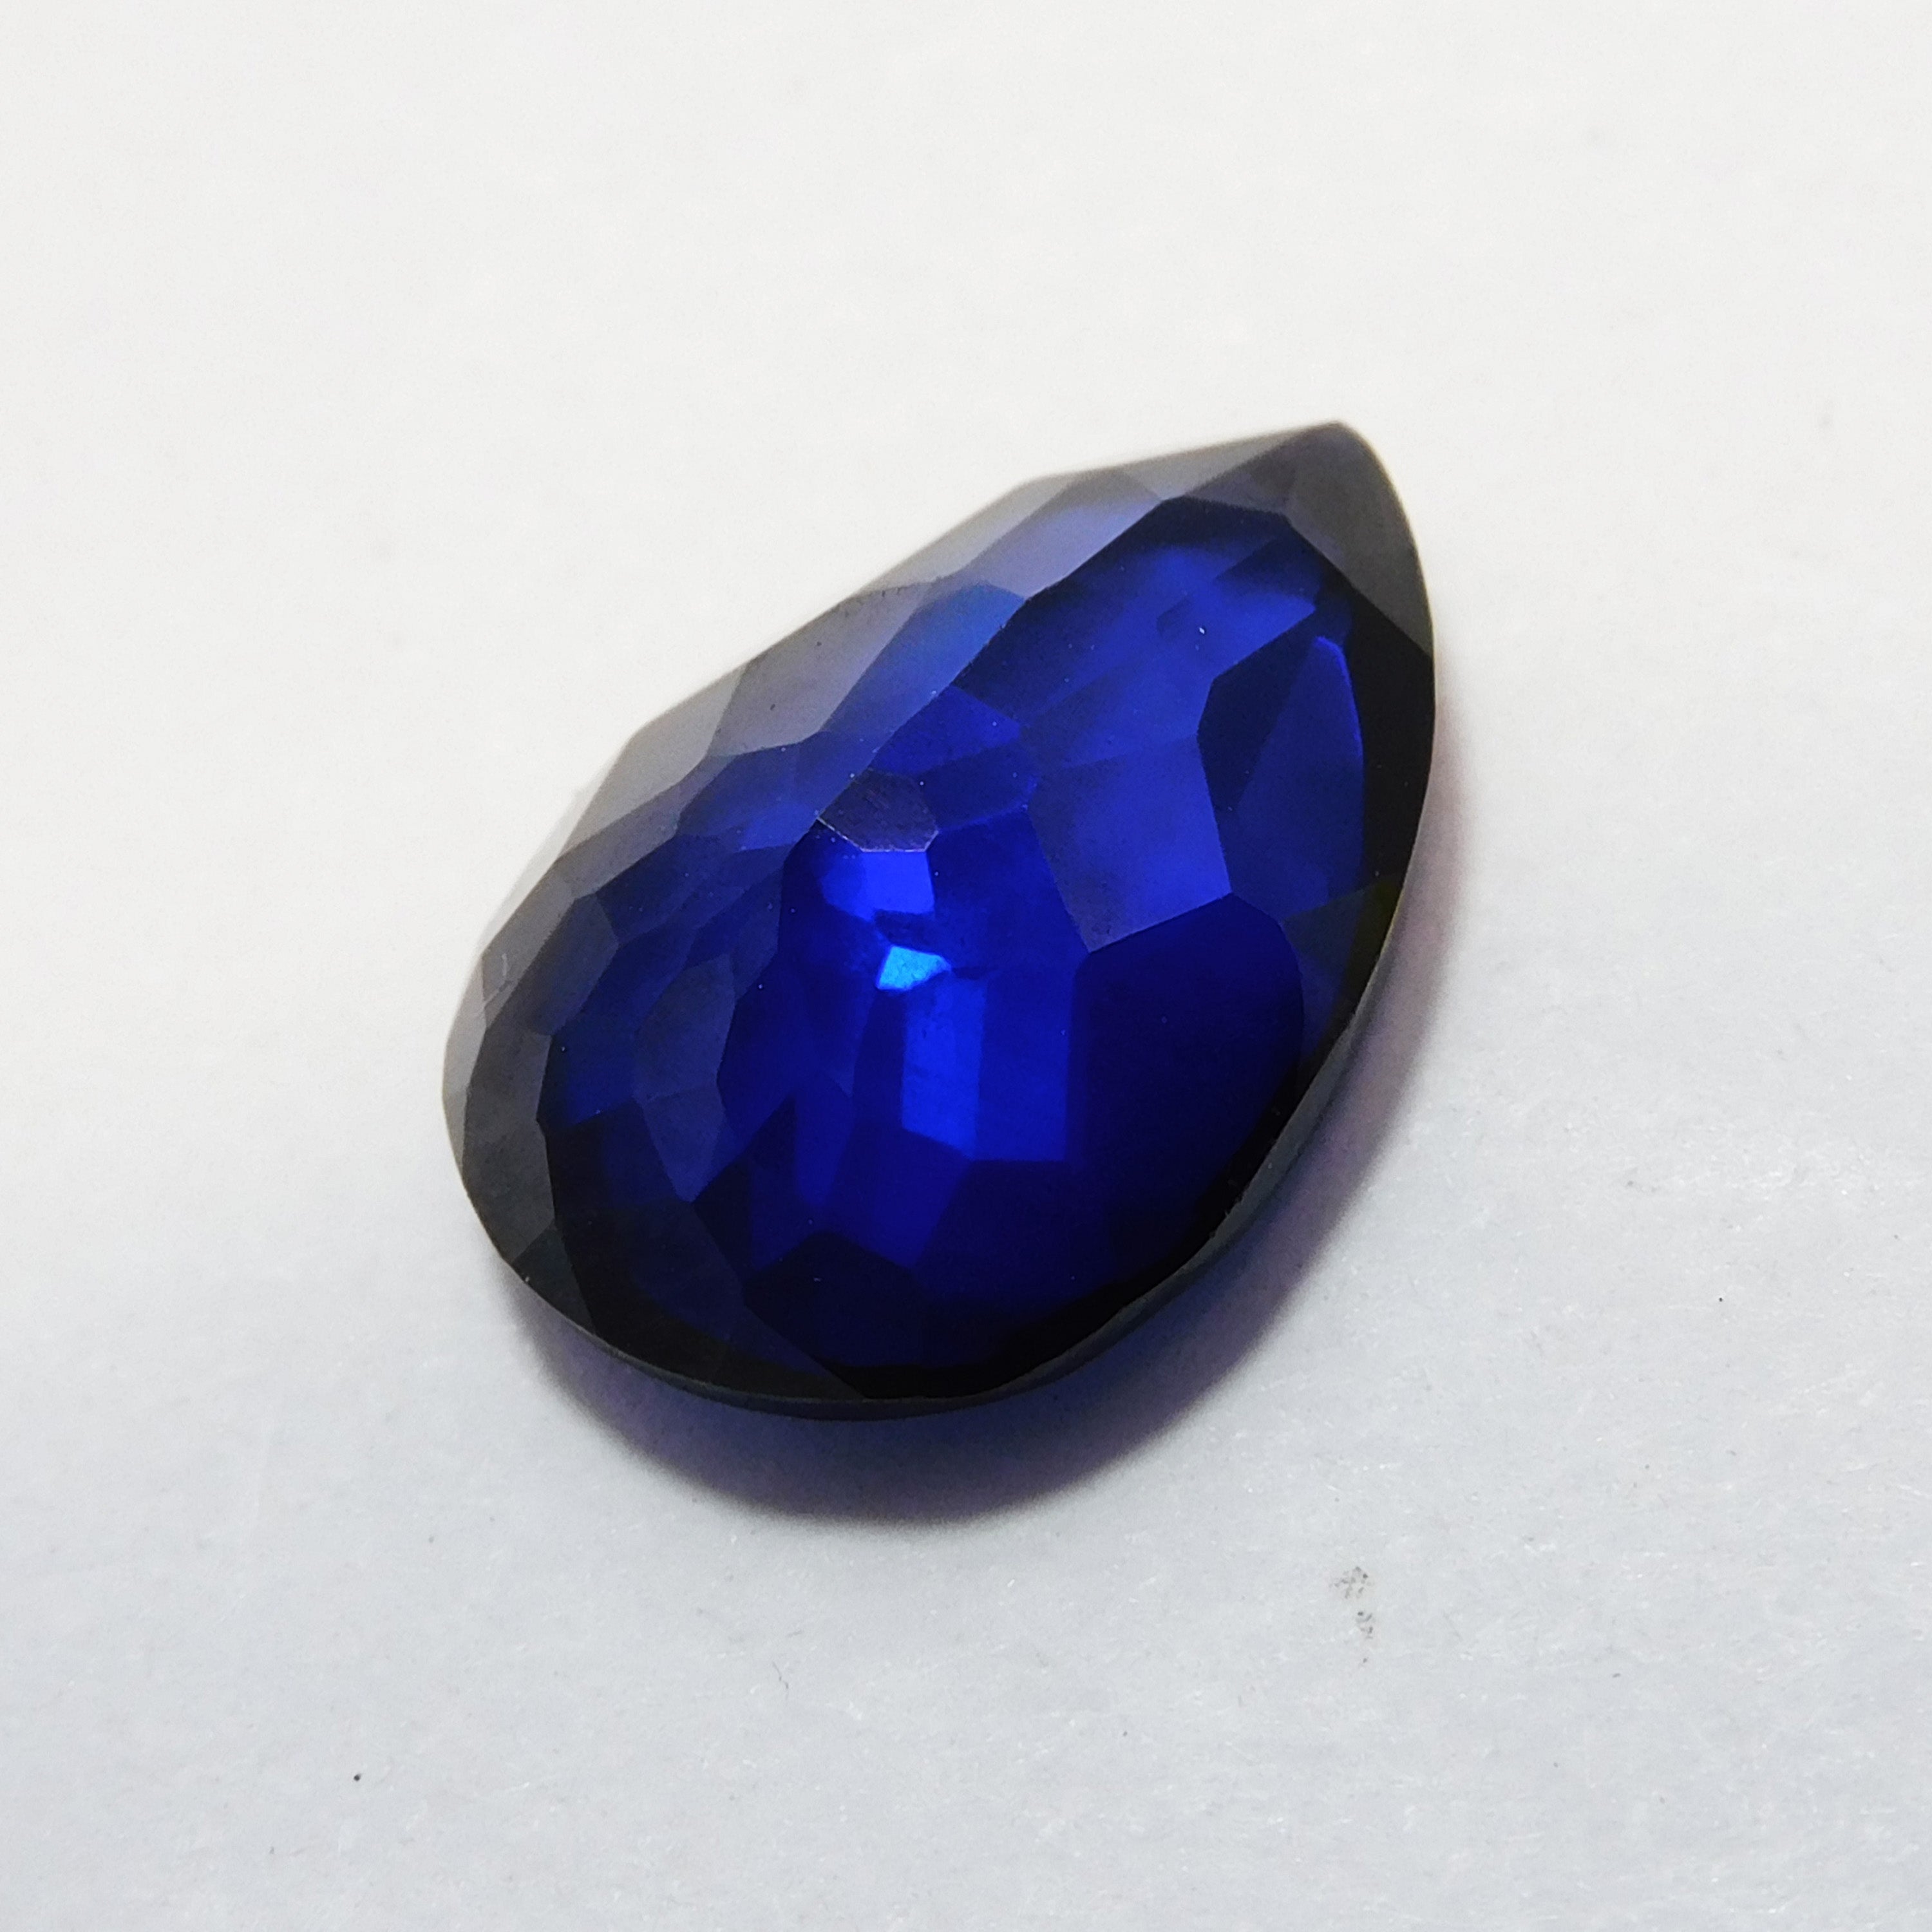 Rare Gemstone 8.74 Carat Blue Color Pear Cut Natural Tanzanite Certified Loose Gemstone | Best Offer | Gift For Her /Him